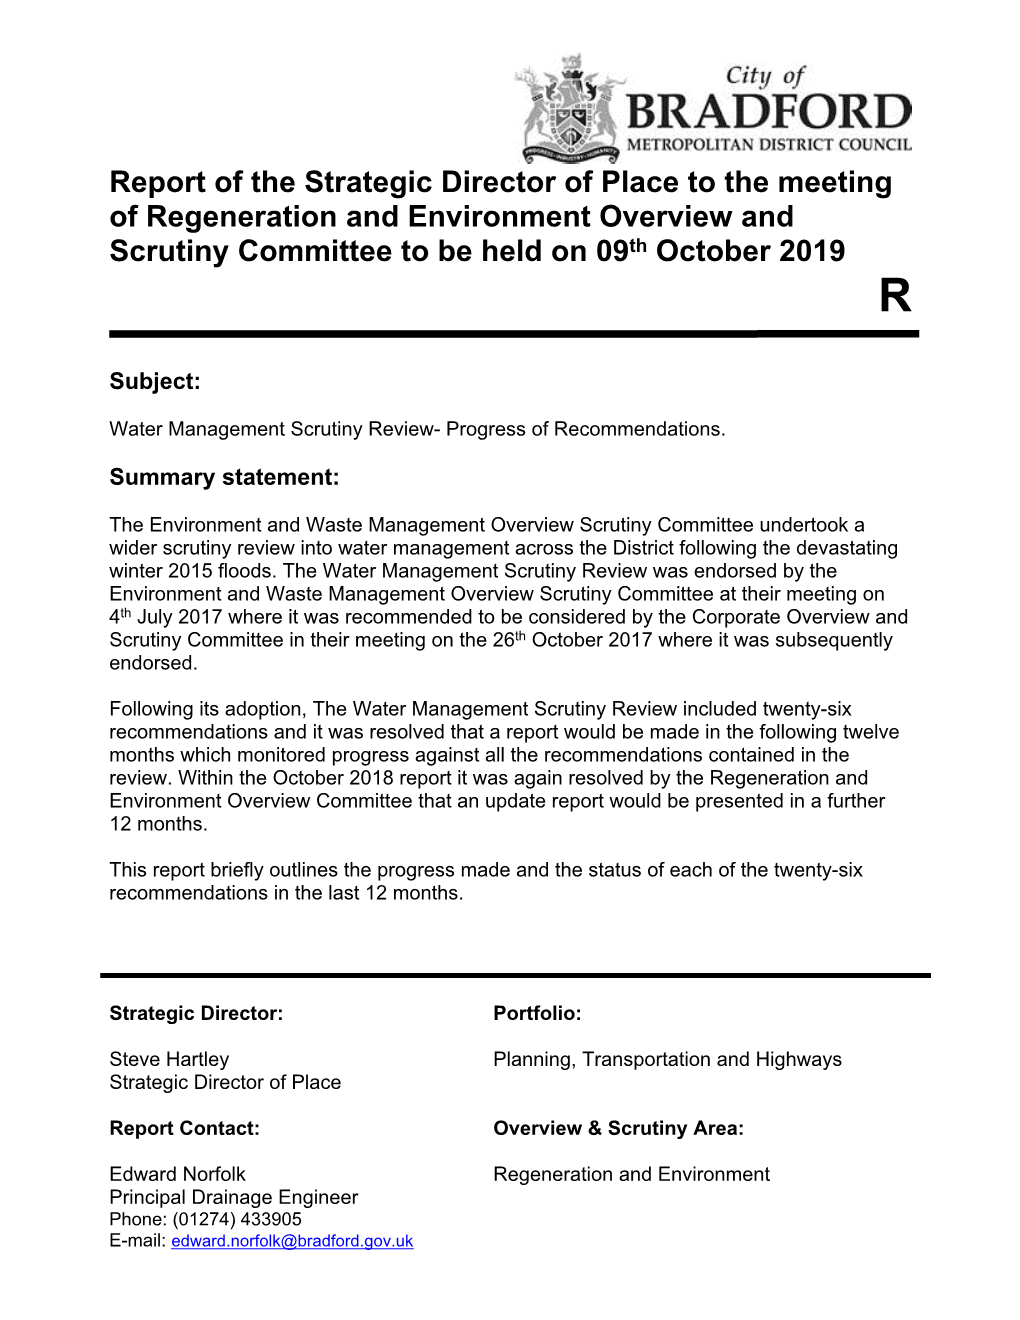 Report of the [Director] to the Meeting of [Name of Committee] to Be Held on [Date]